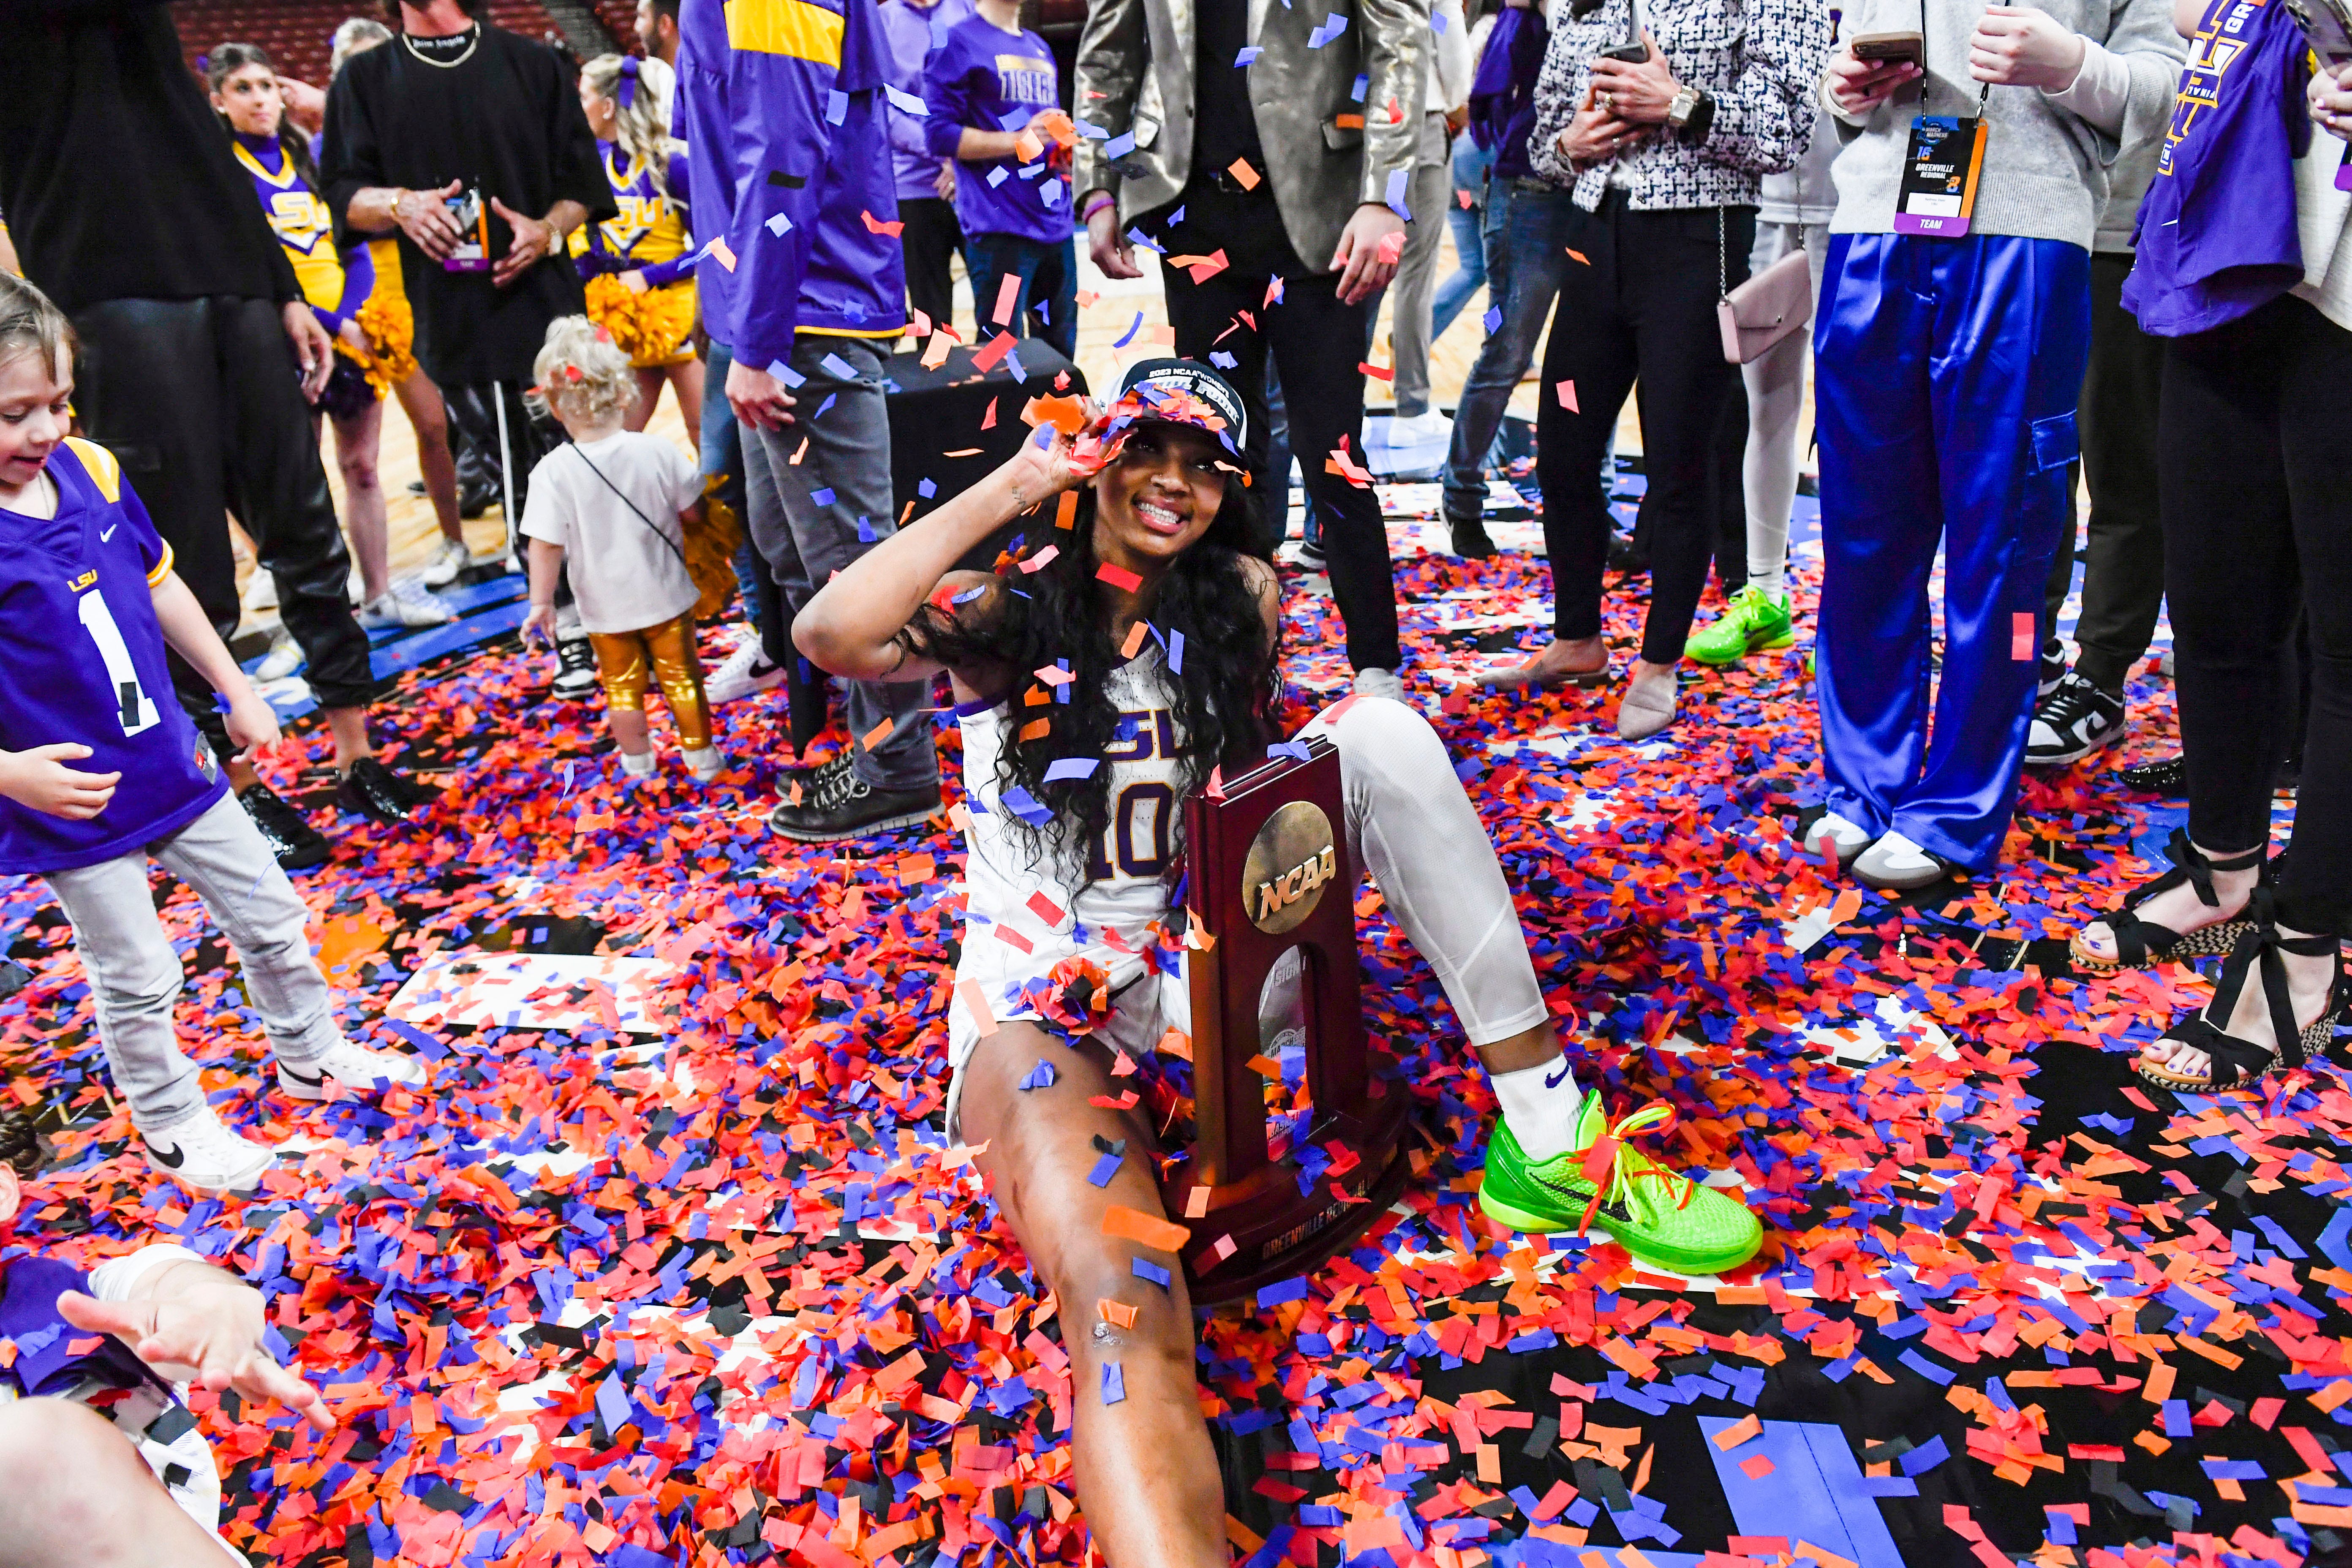 Louisiana State University forward Angel Reese (10) poses for a photo with the NCAA trophy after winning the NCAA Women's Greenville Regional Elite Eight Basketball Tournament at Bon Secours Wellness Arena in Greenville, S.C. Sunday, March 26, 2023.